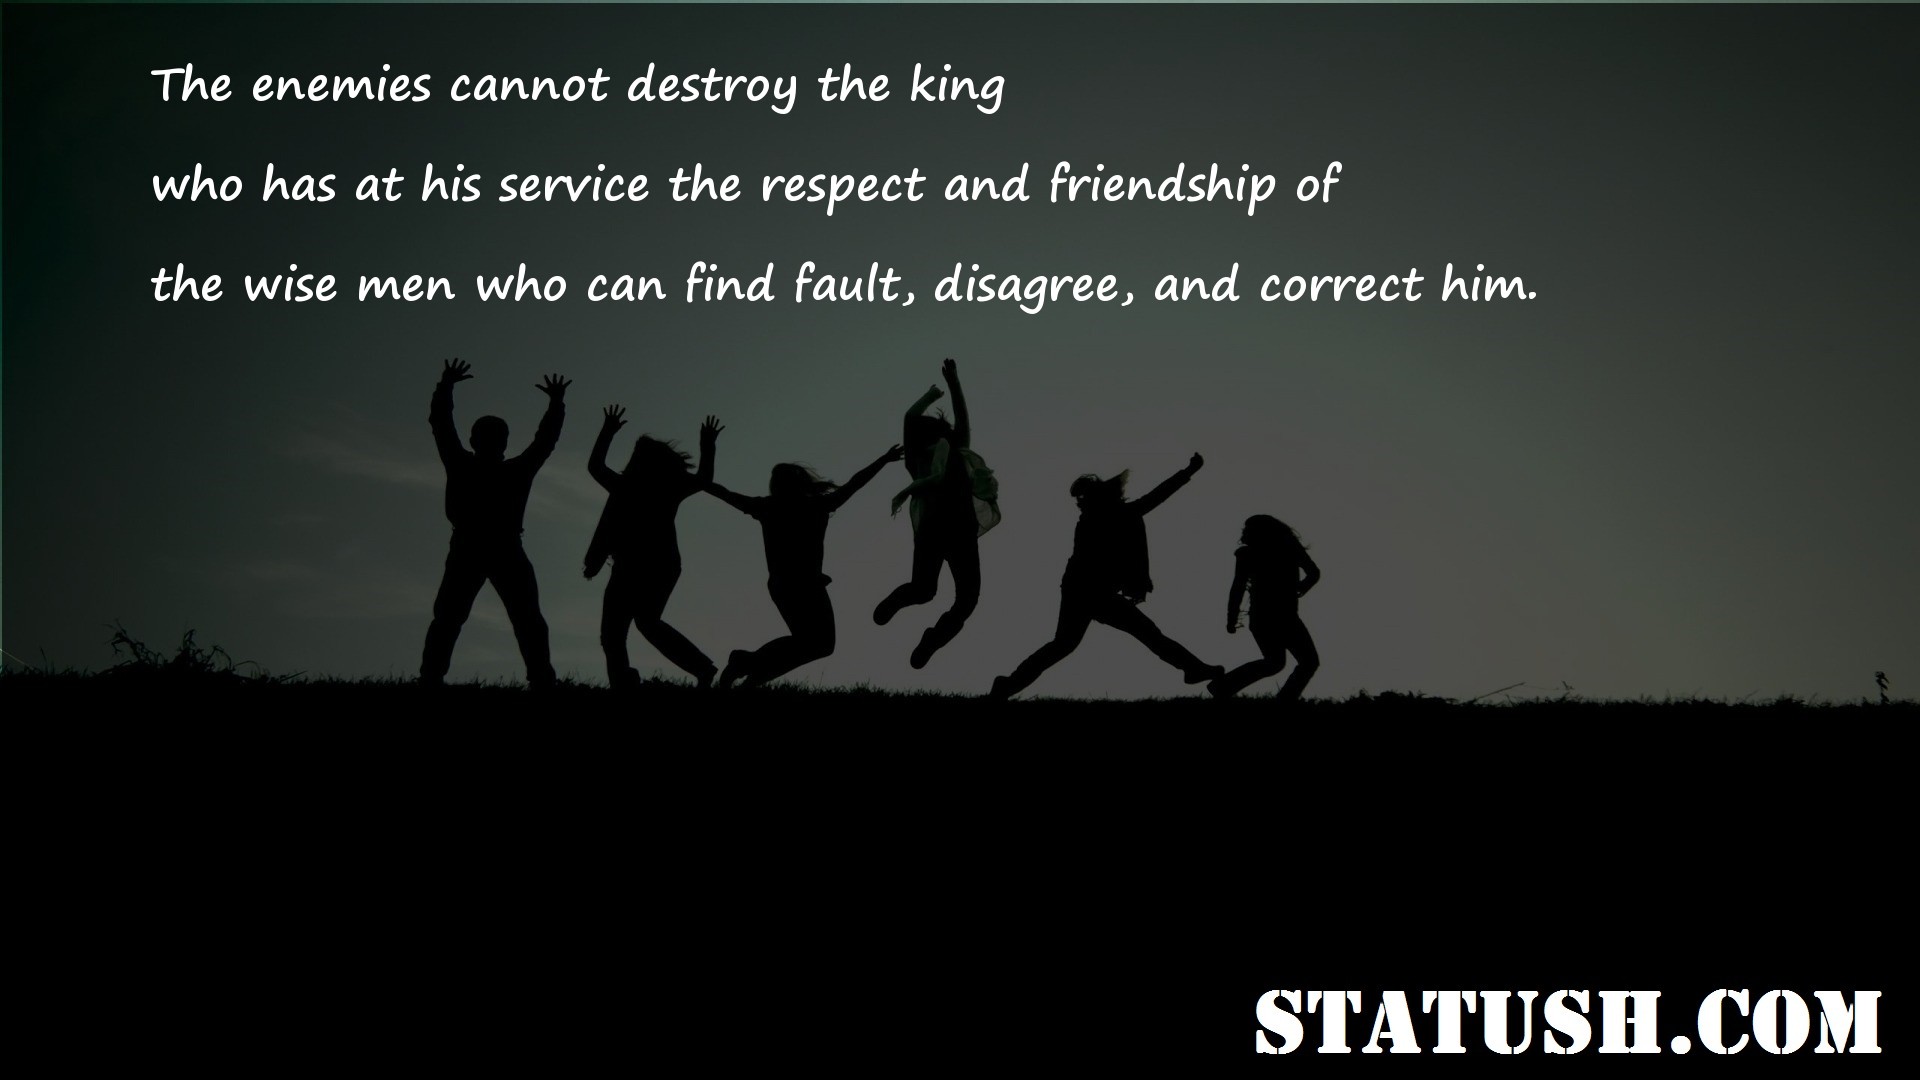 The enemies cannot destroy the king - Friendship Quotes at statush.com